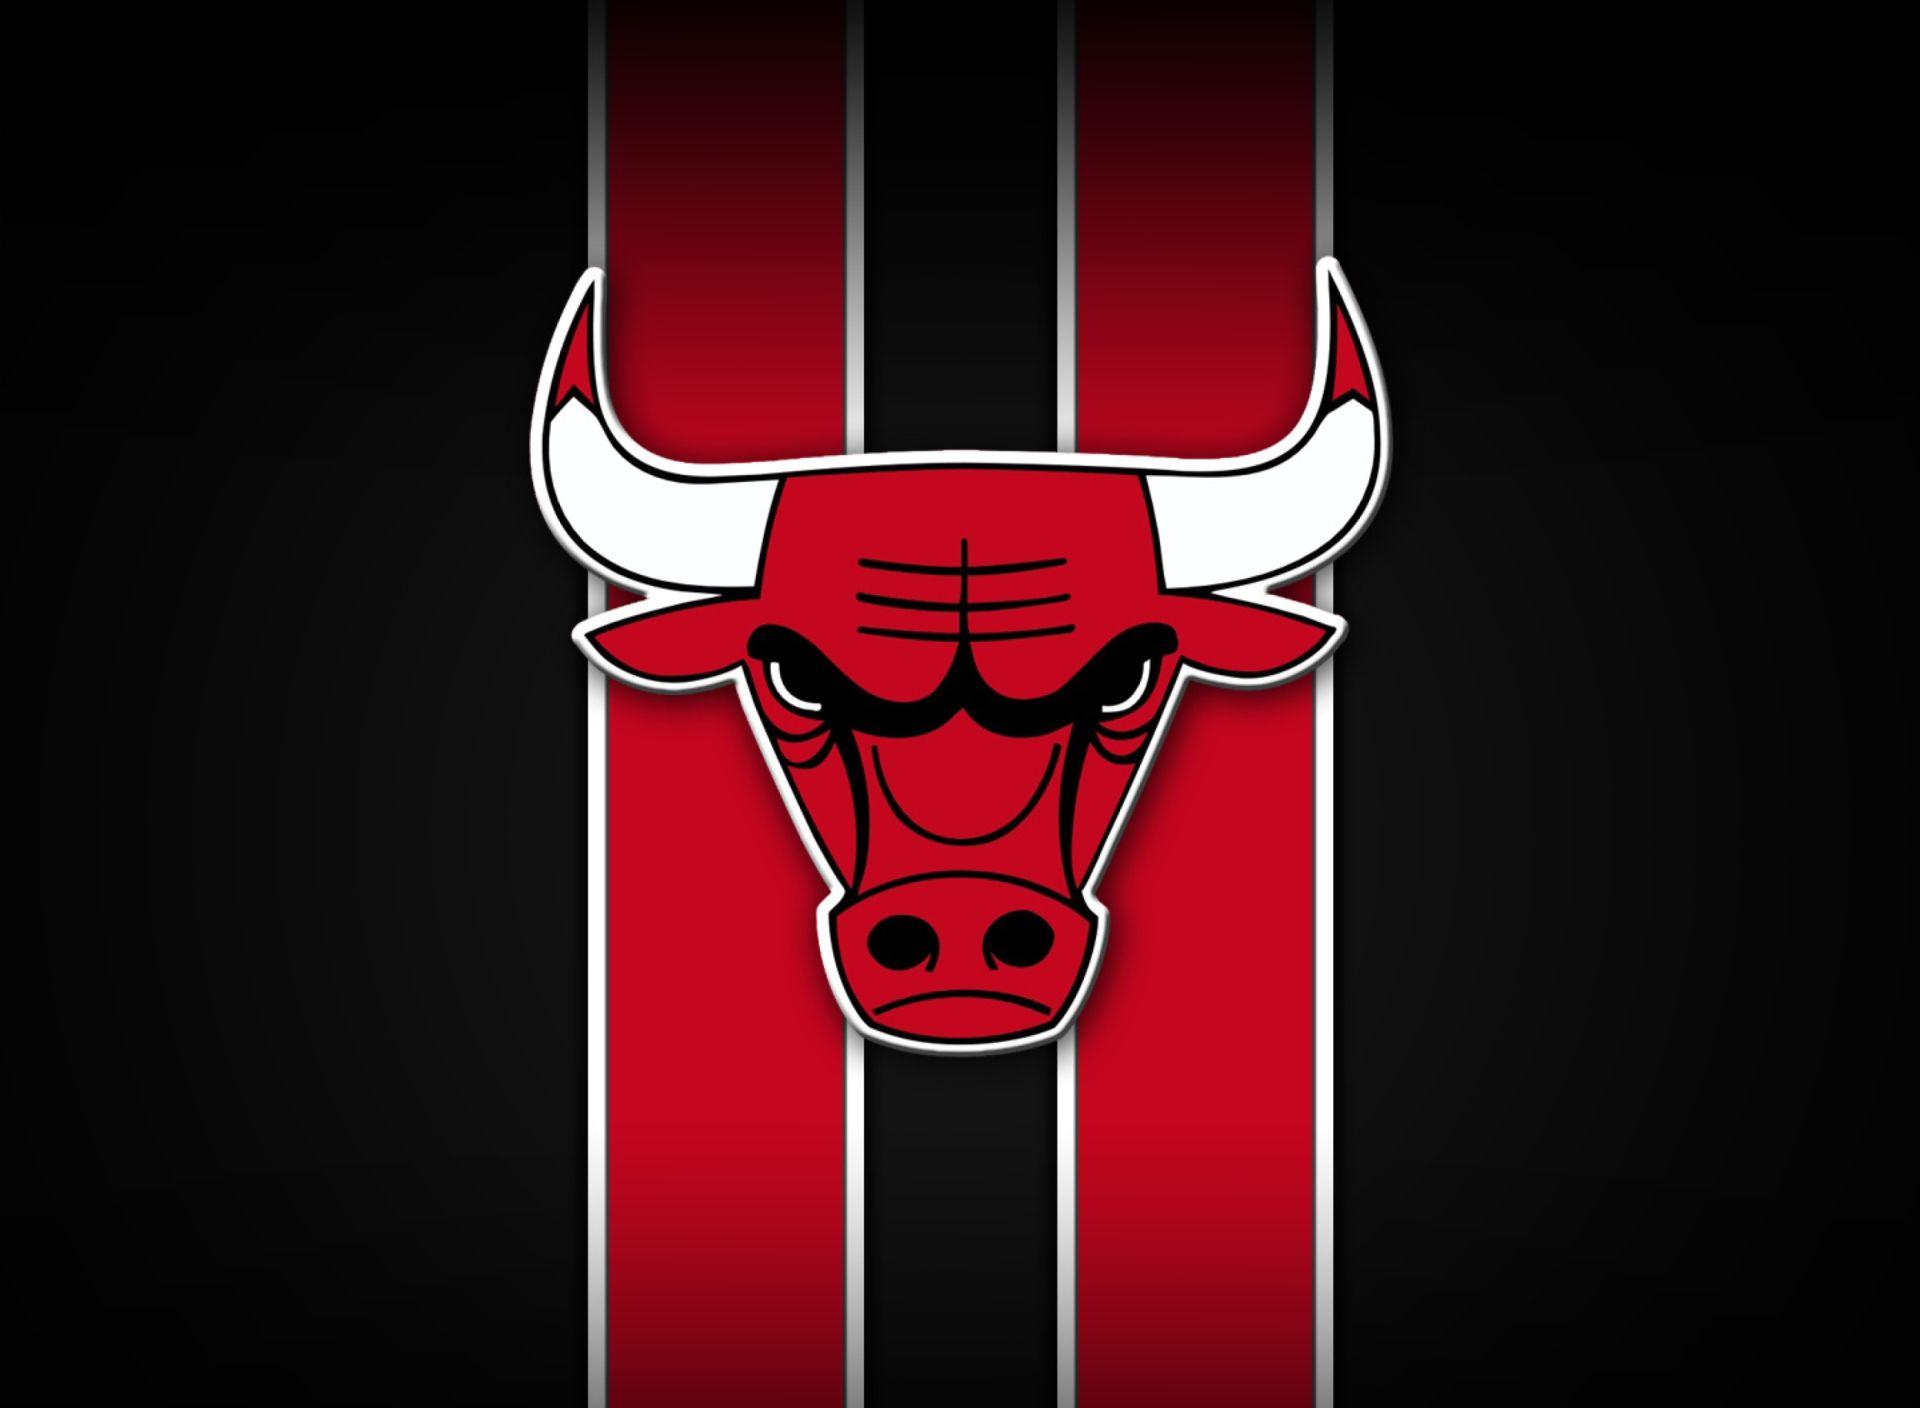 Chicago Bulls Wallpaper Collection For Free Download. HD Wallpaper